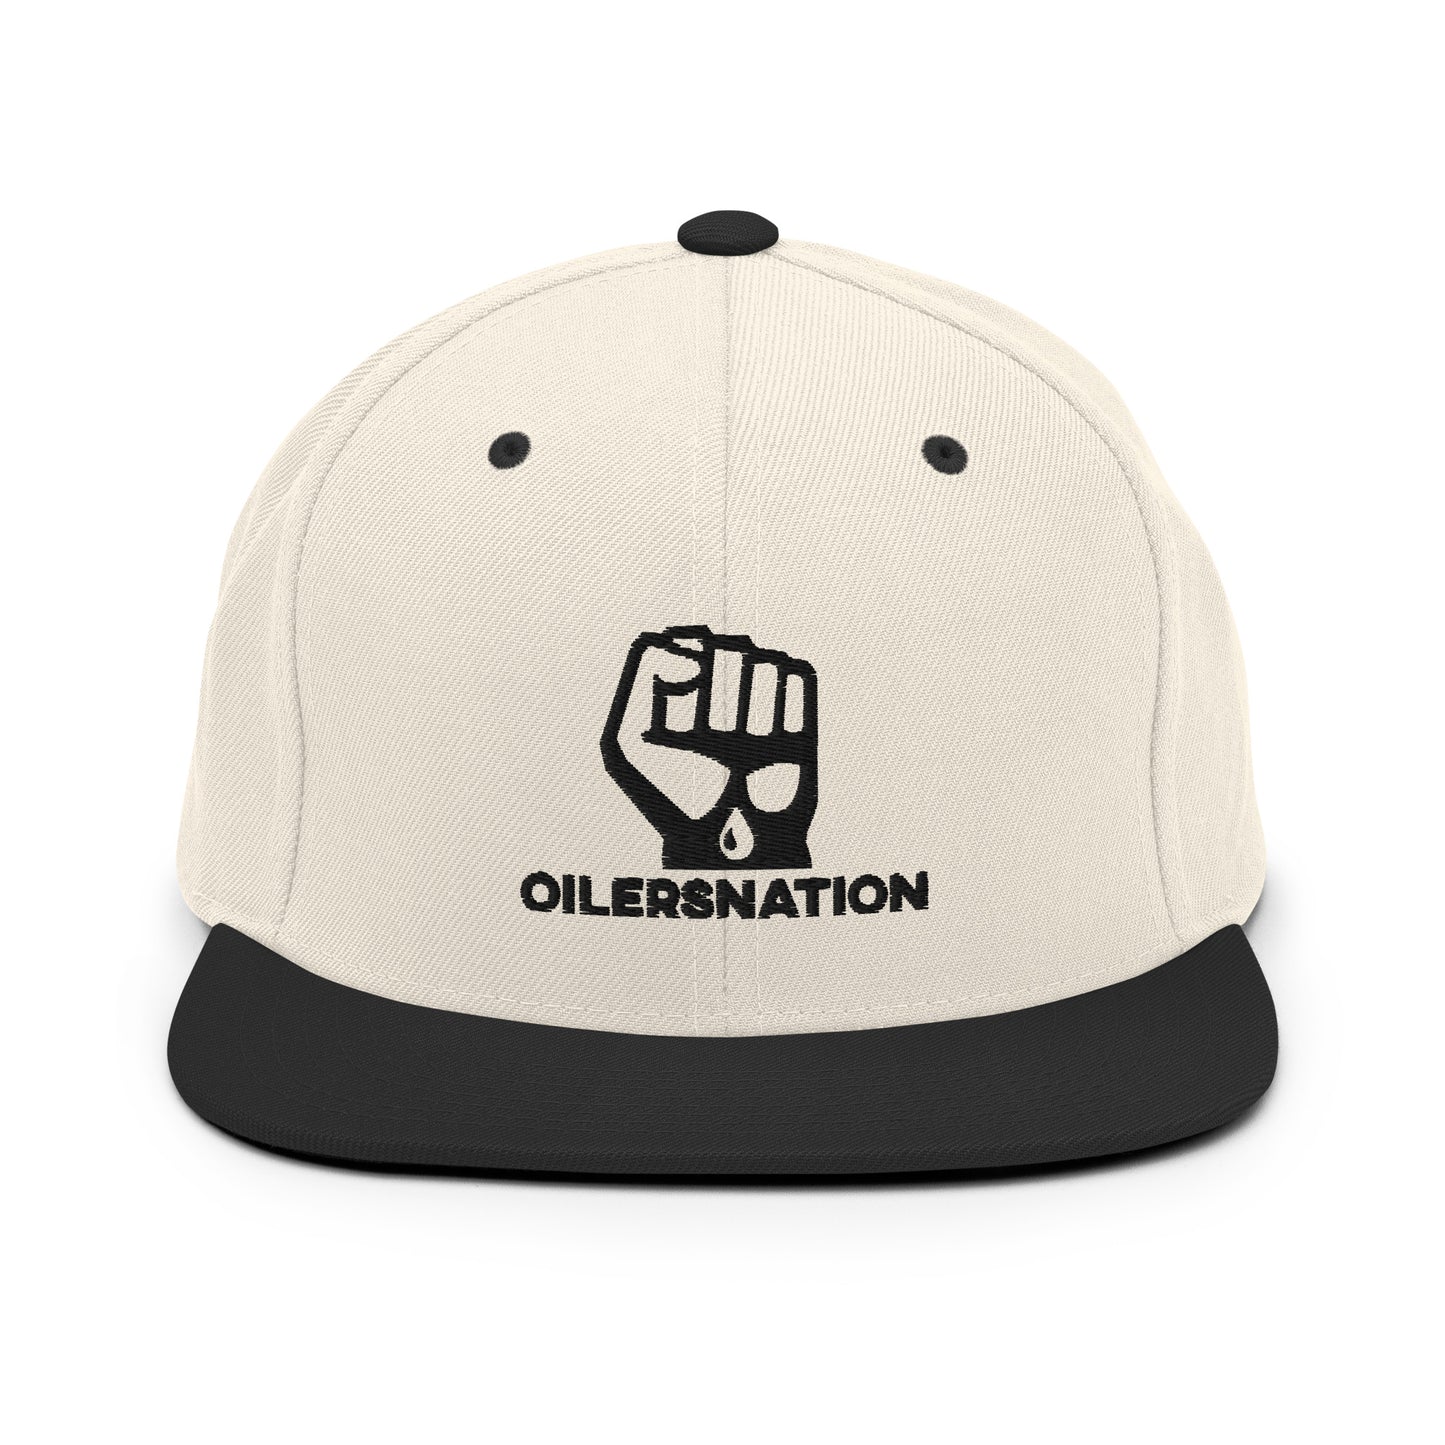 THE CLASSICS - Oilersnation White Snapback Hat